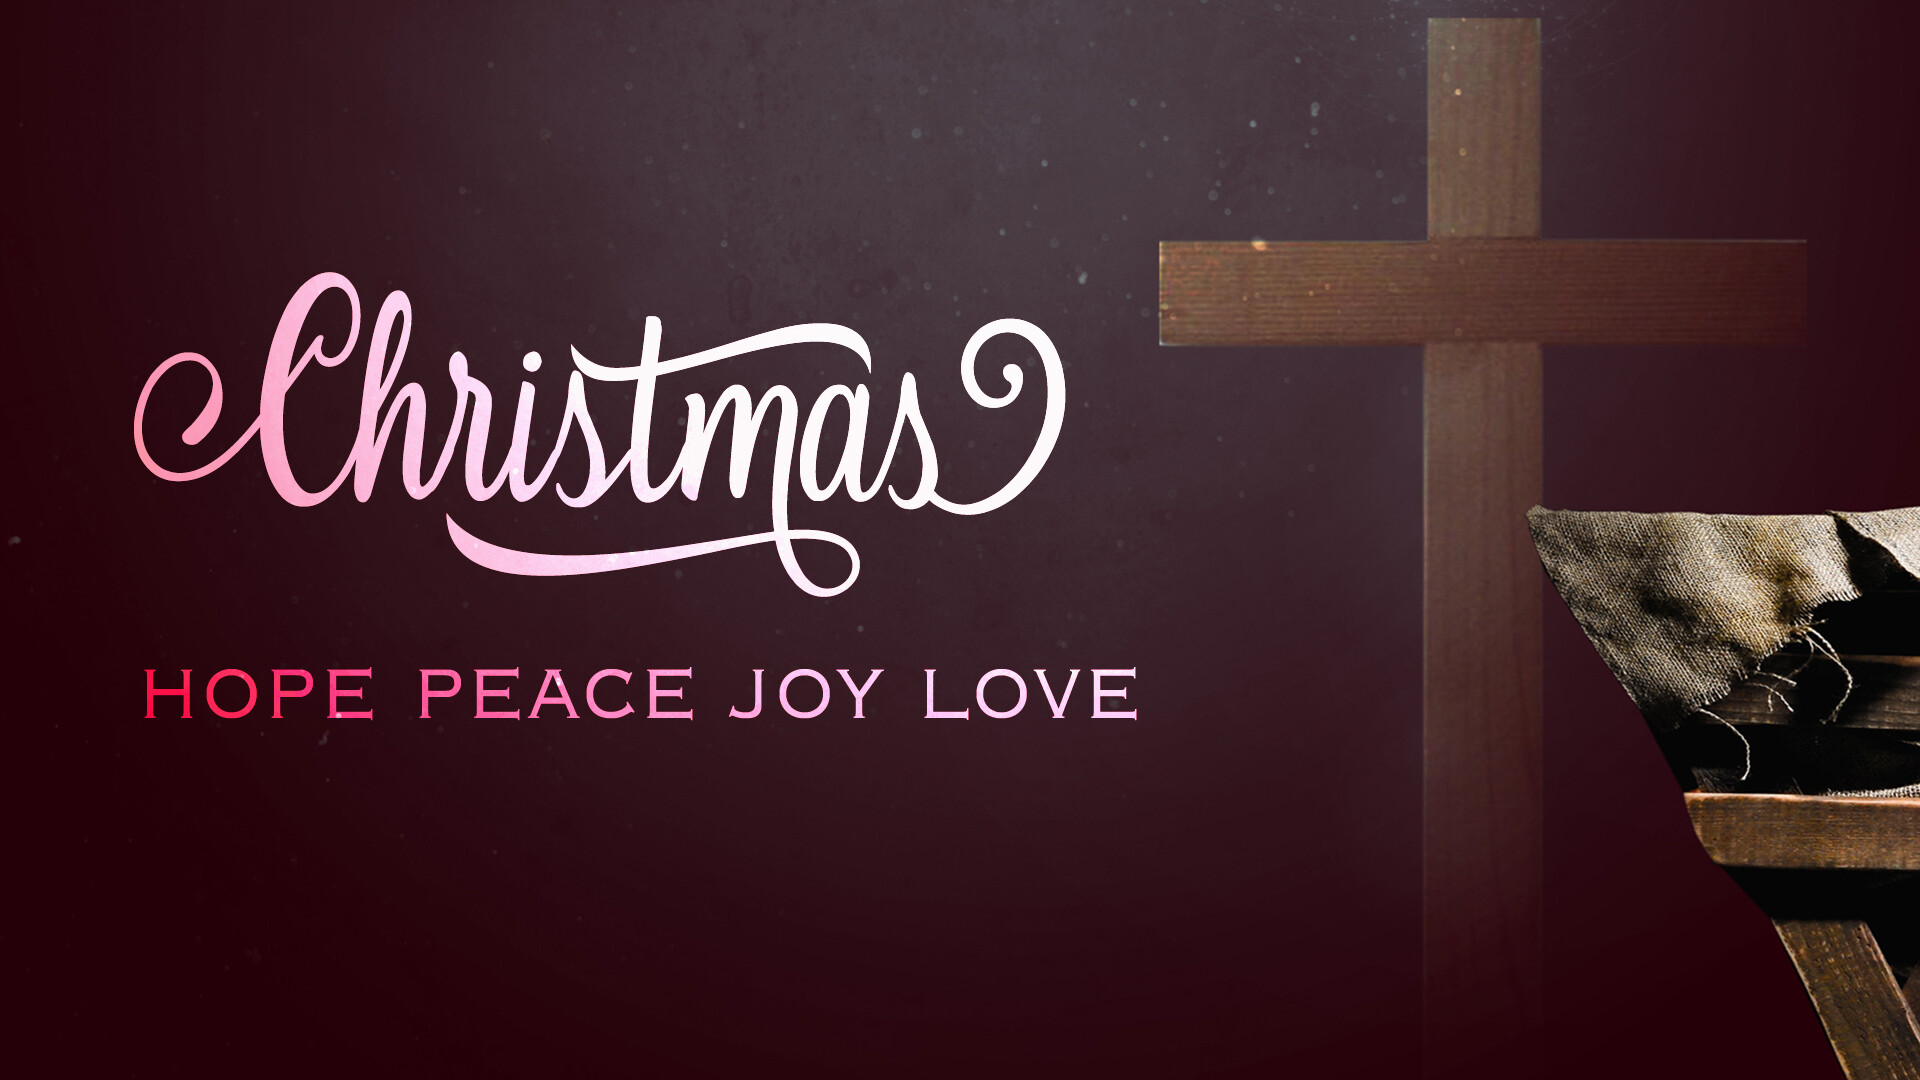 The Love of Christmas